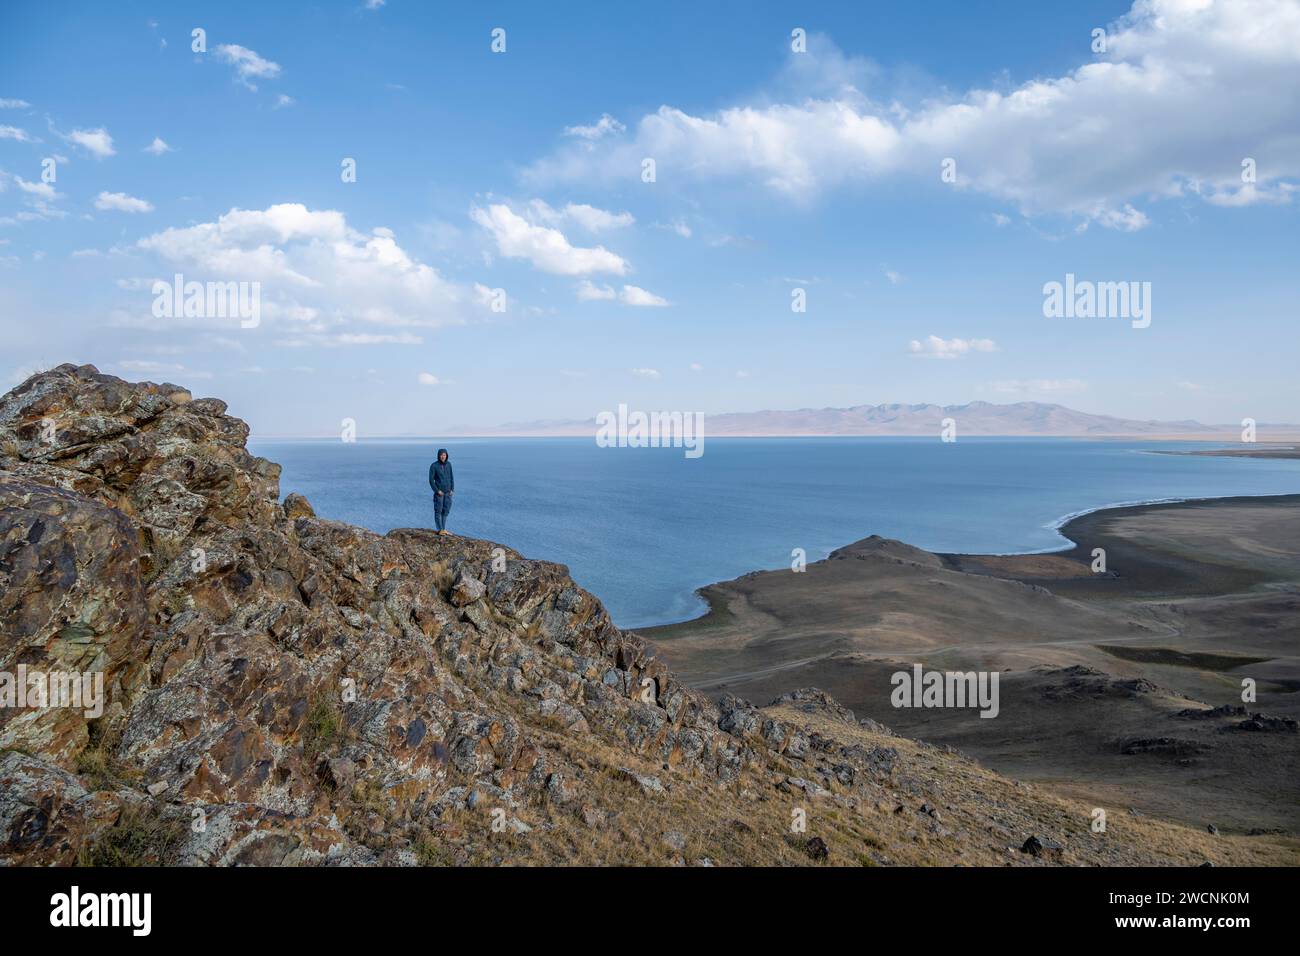 Tourist standing on a hill, view of mountain lake Song Kul, Naryn region, Kyrgyzstan Stock Photo